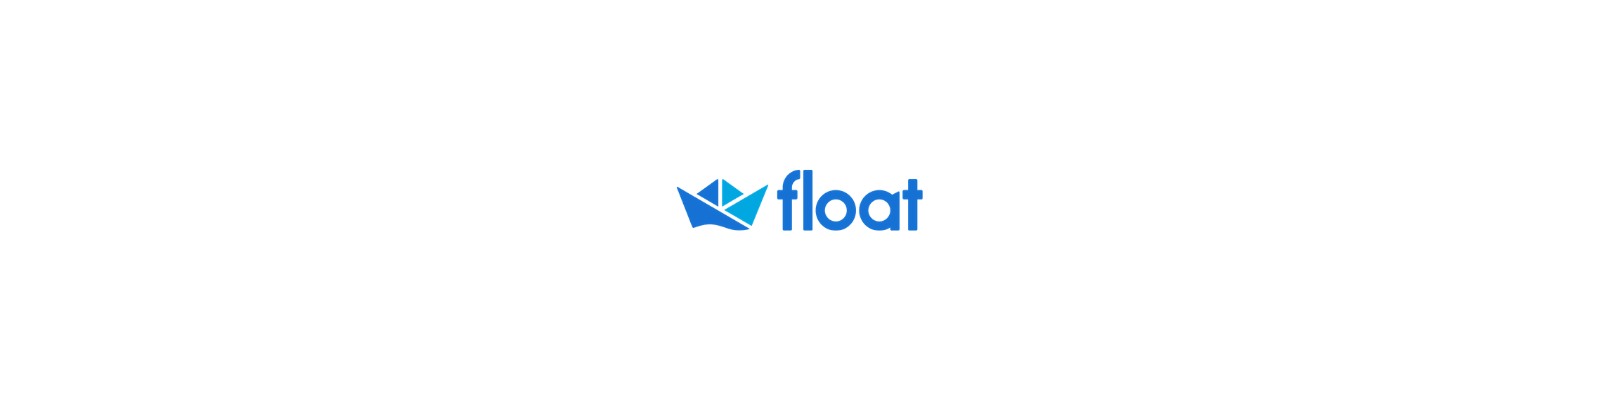 Our friends at Float